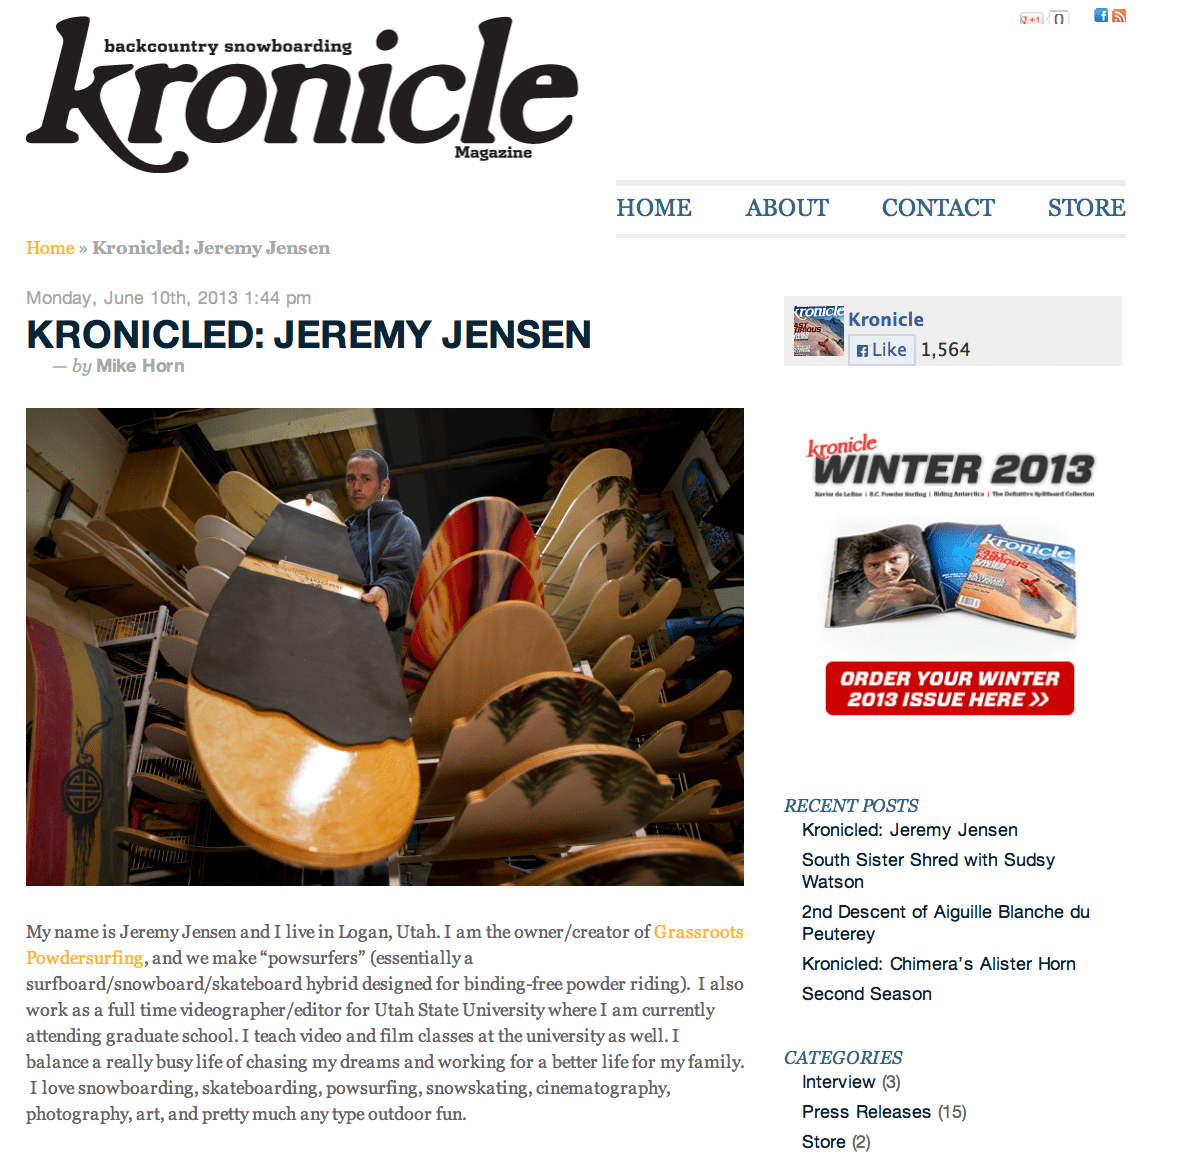 Kronicle Magazine Article featuring Jeremy Jensen, shaper and owner of Grassroots Powdersurfing.